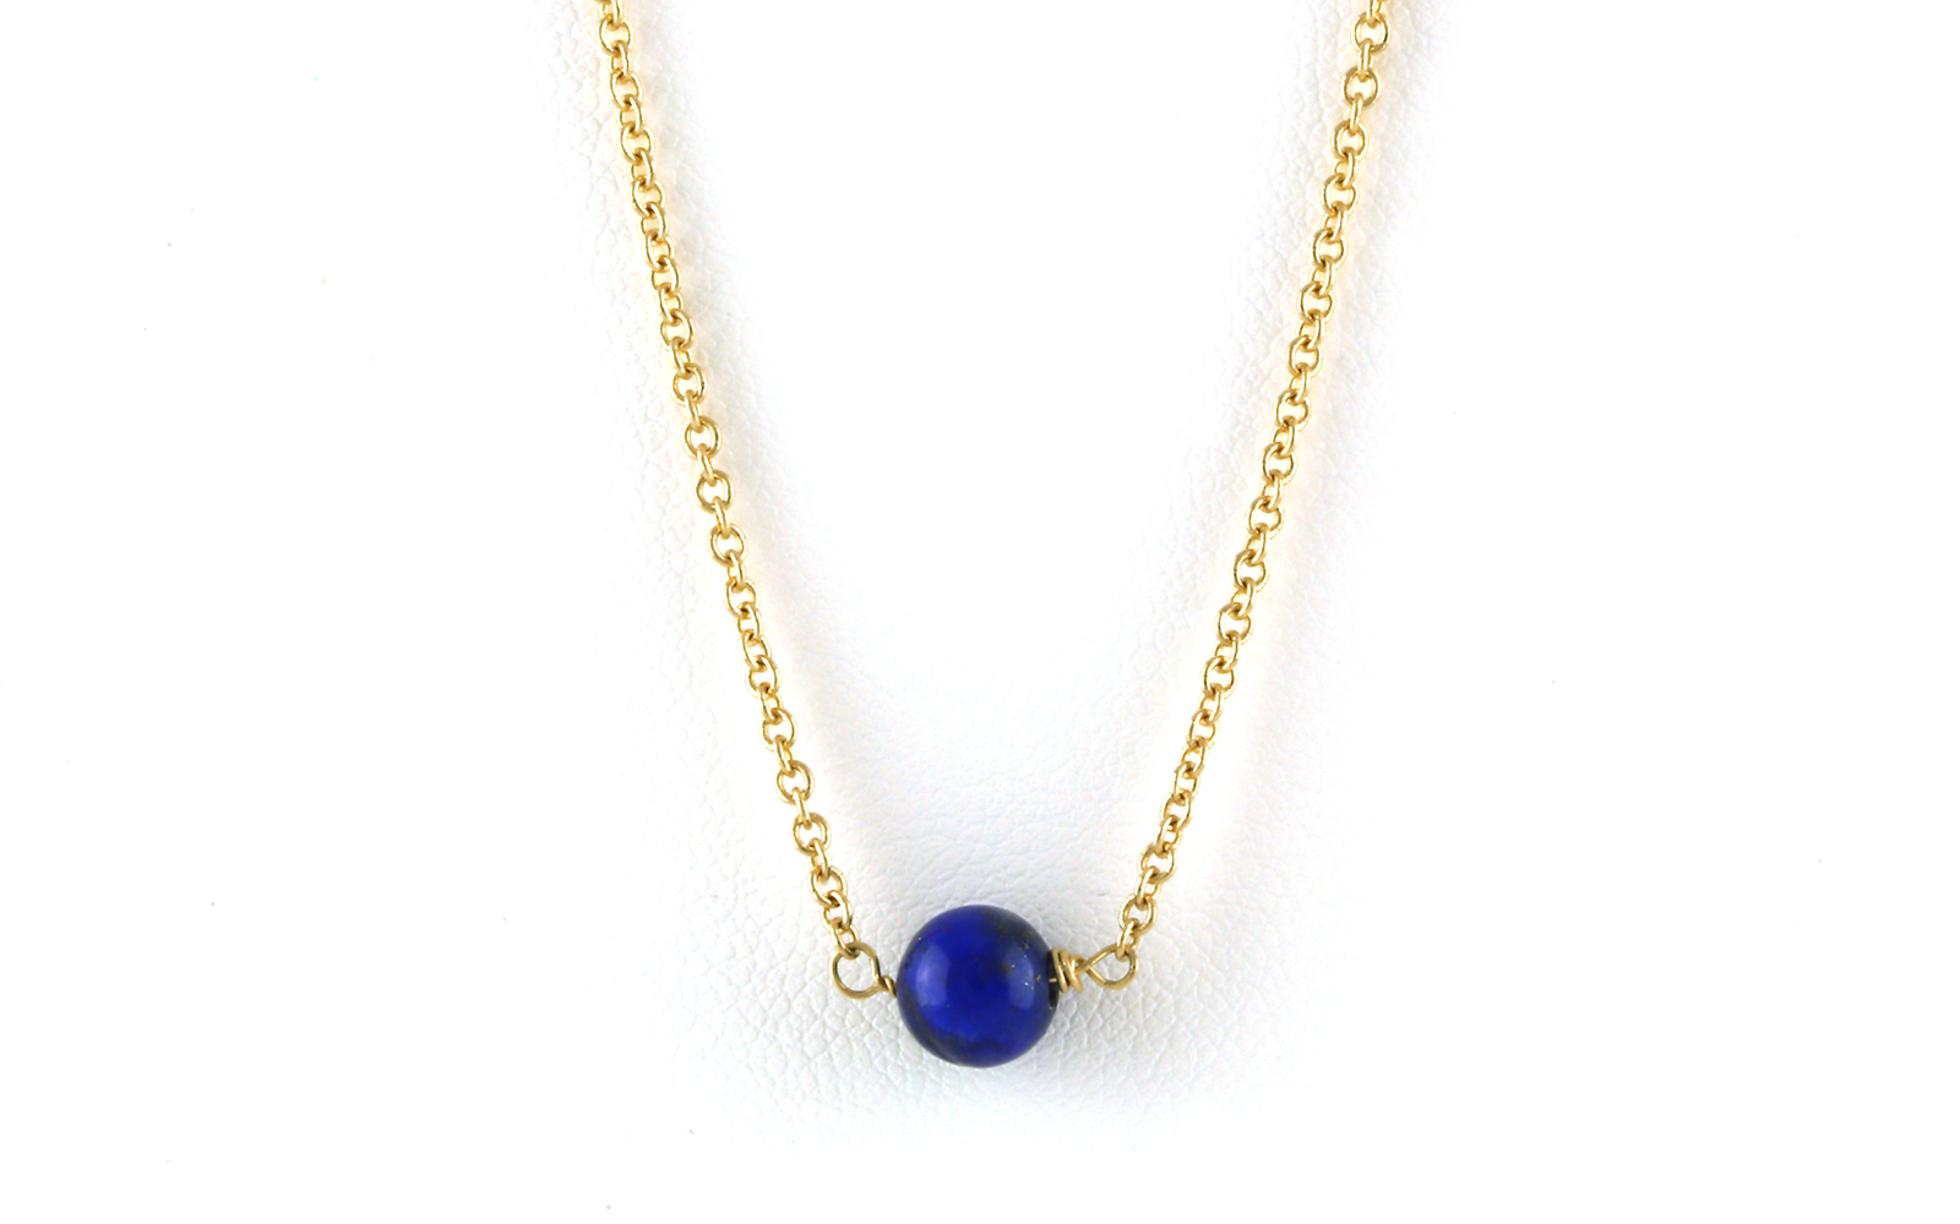 Floating Round Lapis Lazuli Bead Necklace in Yellow Gold